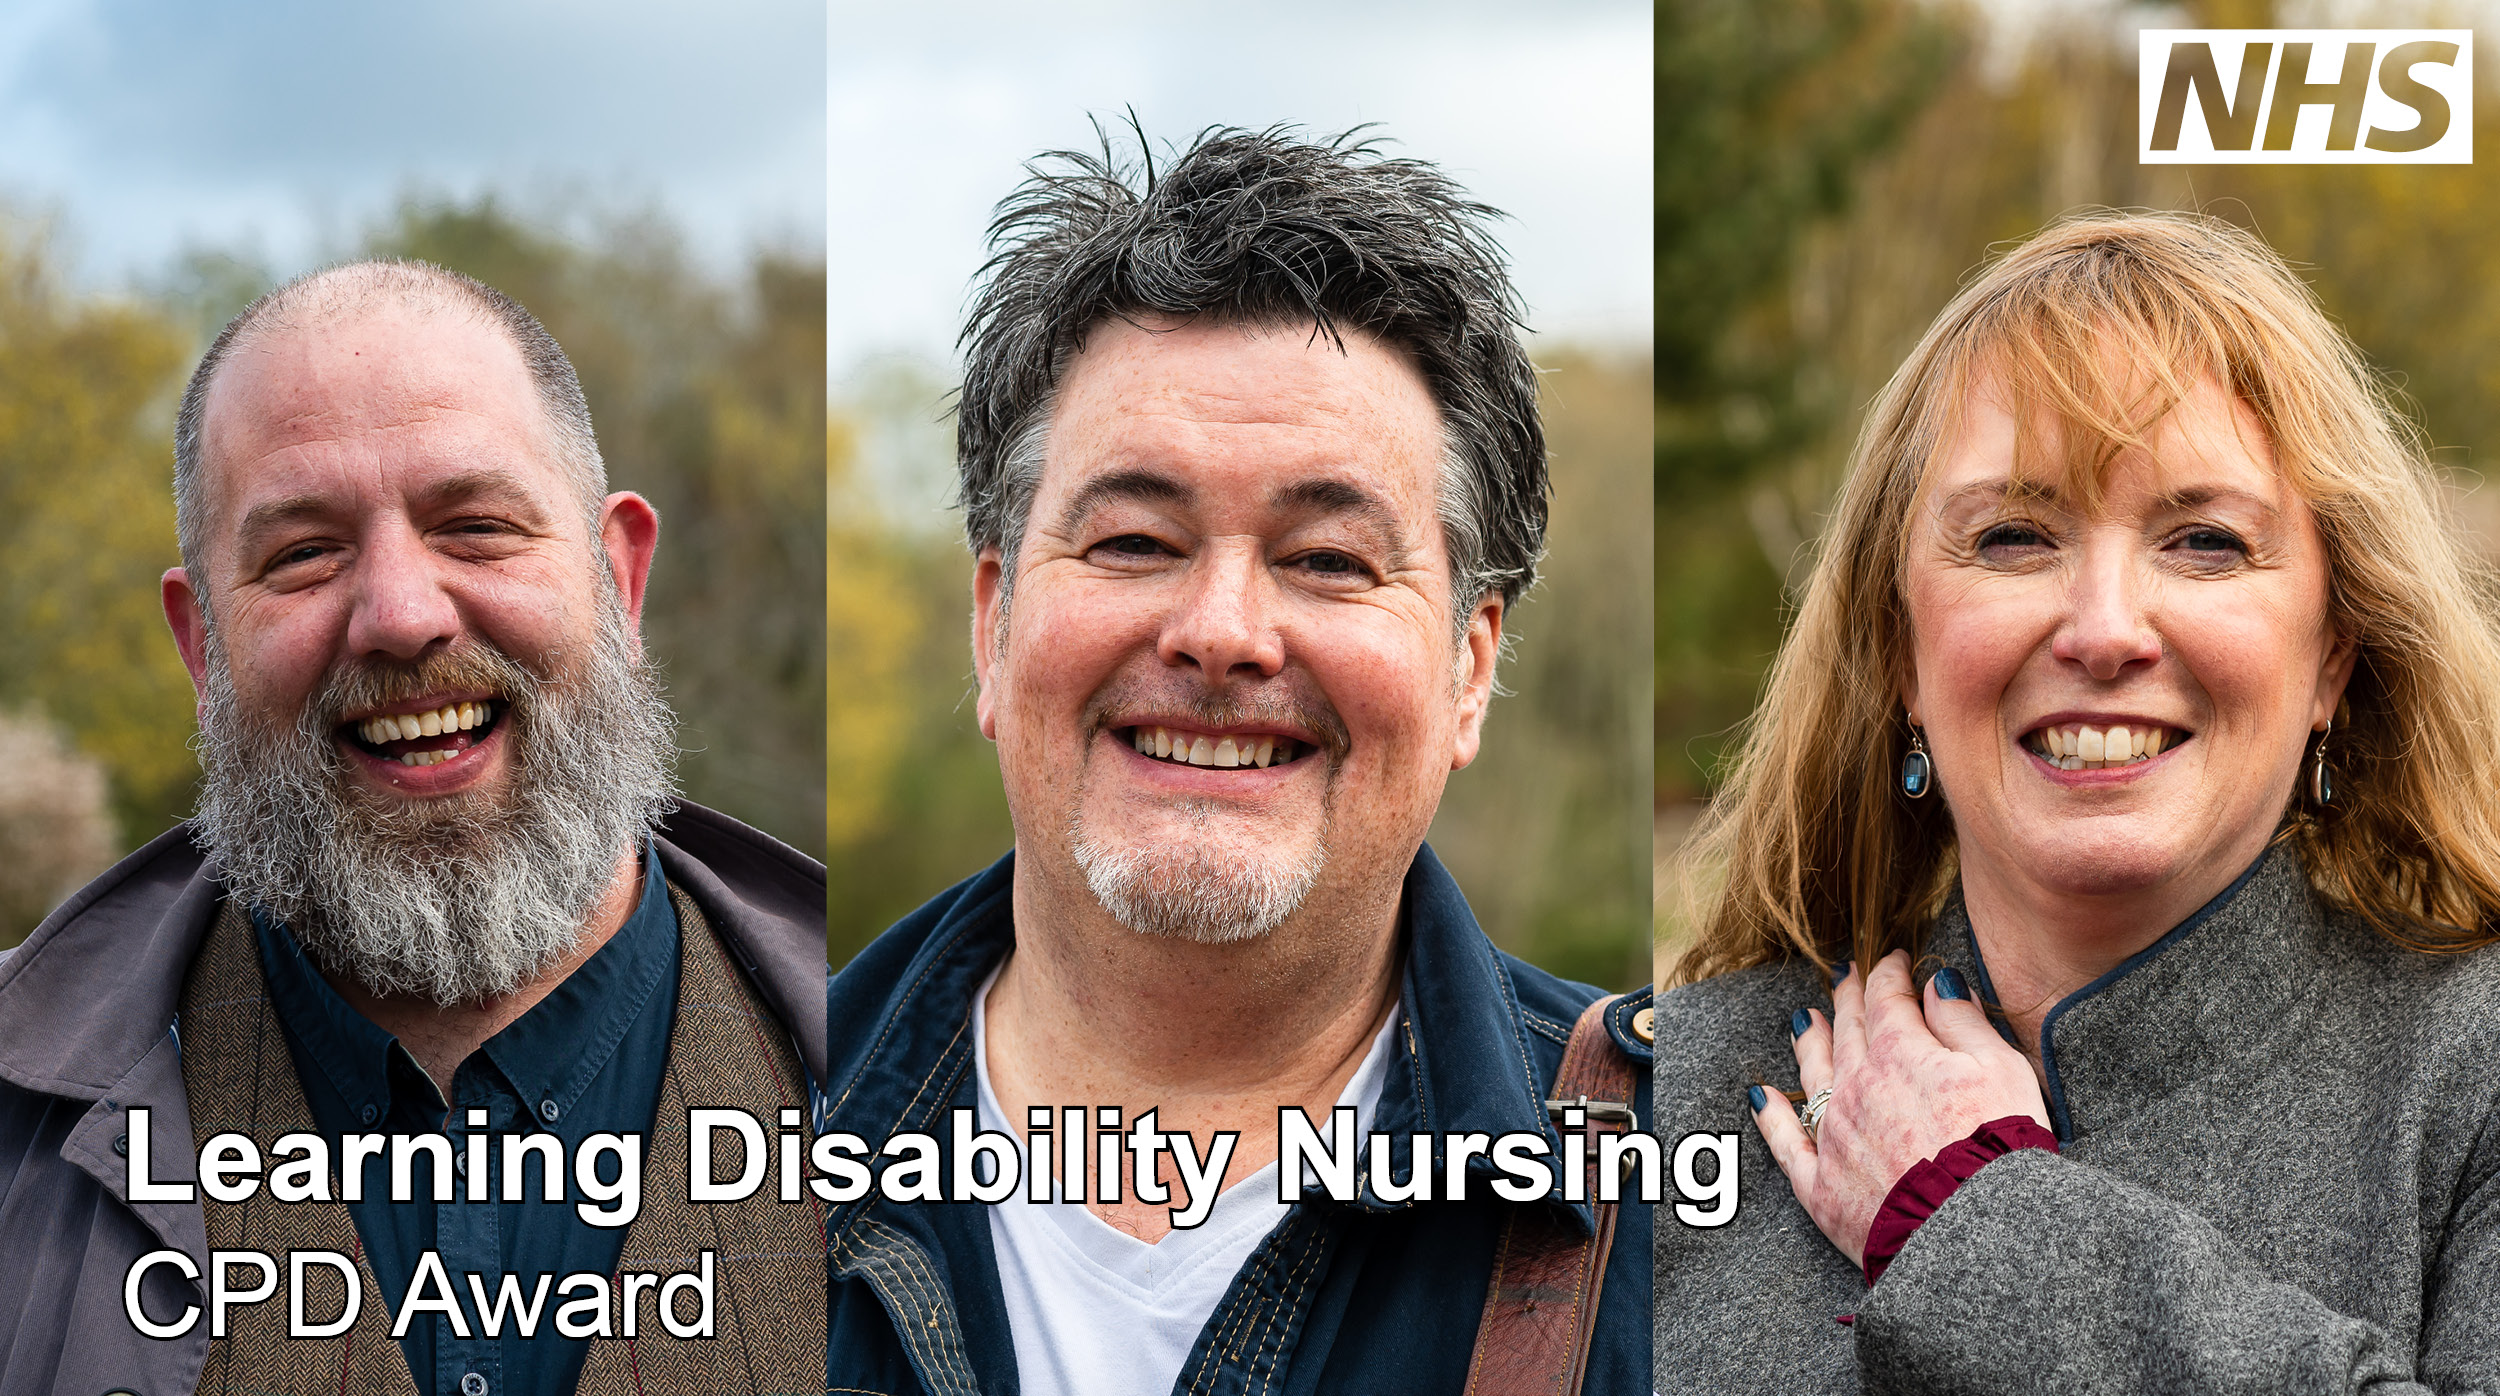 Image for the Learning Disability Nursing CPD Award training programme, with Ben Briggs, David Harling and Ellie Gordon.